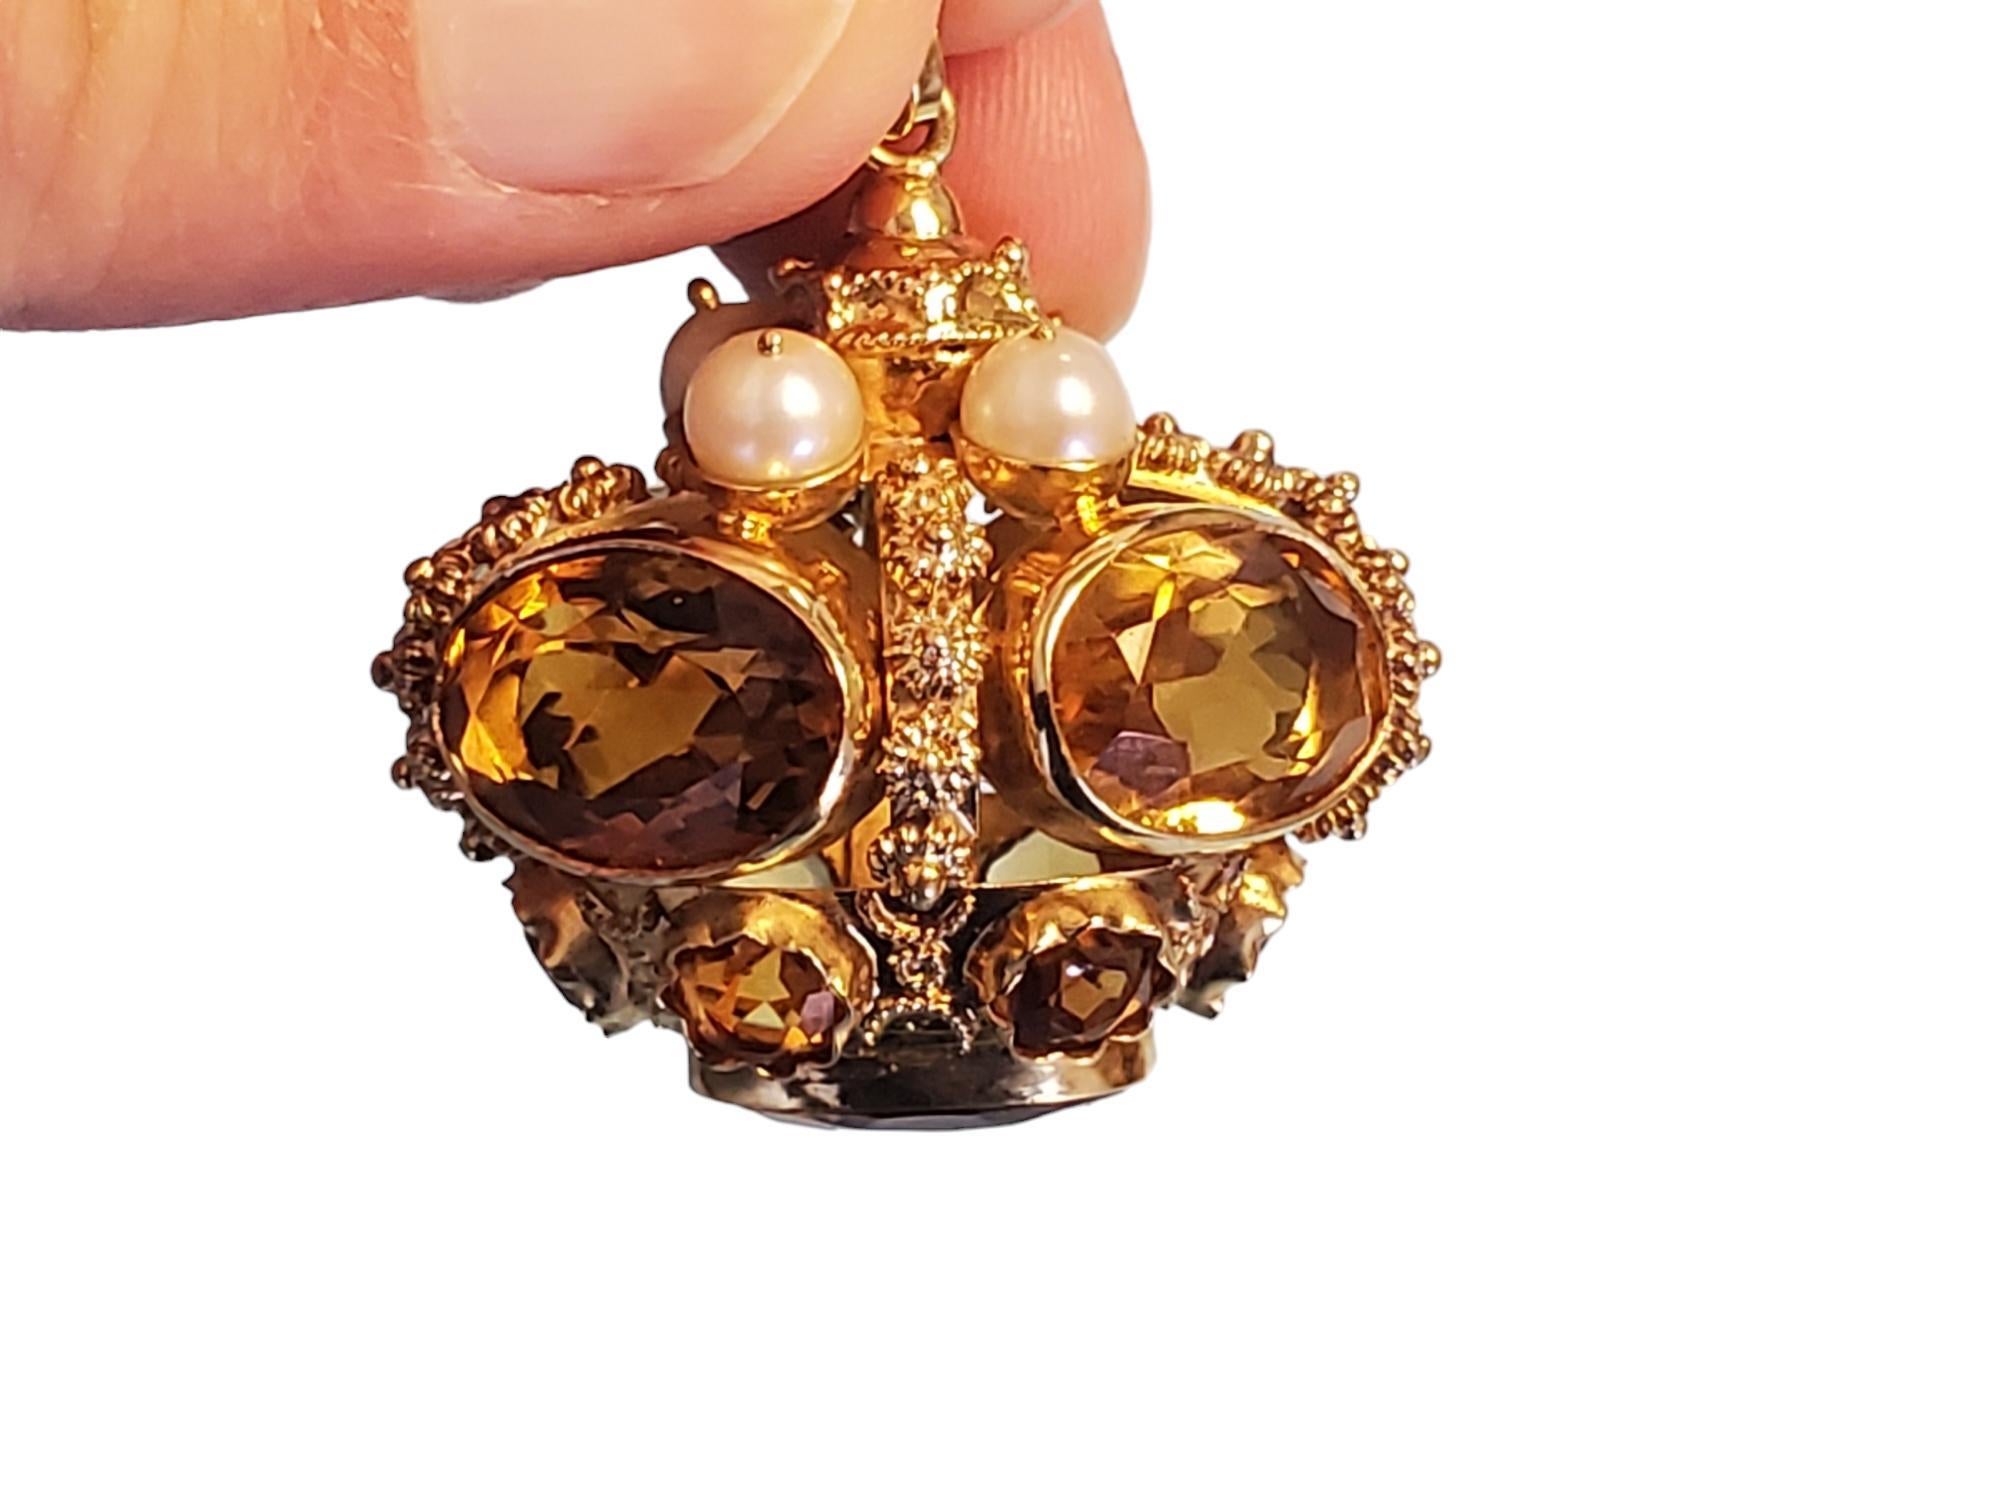 Oval Cut Vintage Pendant Crown 18k Yellow Gold Charm Oval Citrine and Pearls